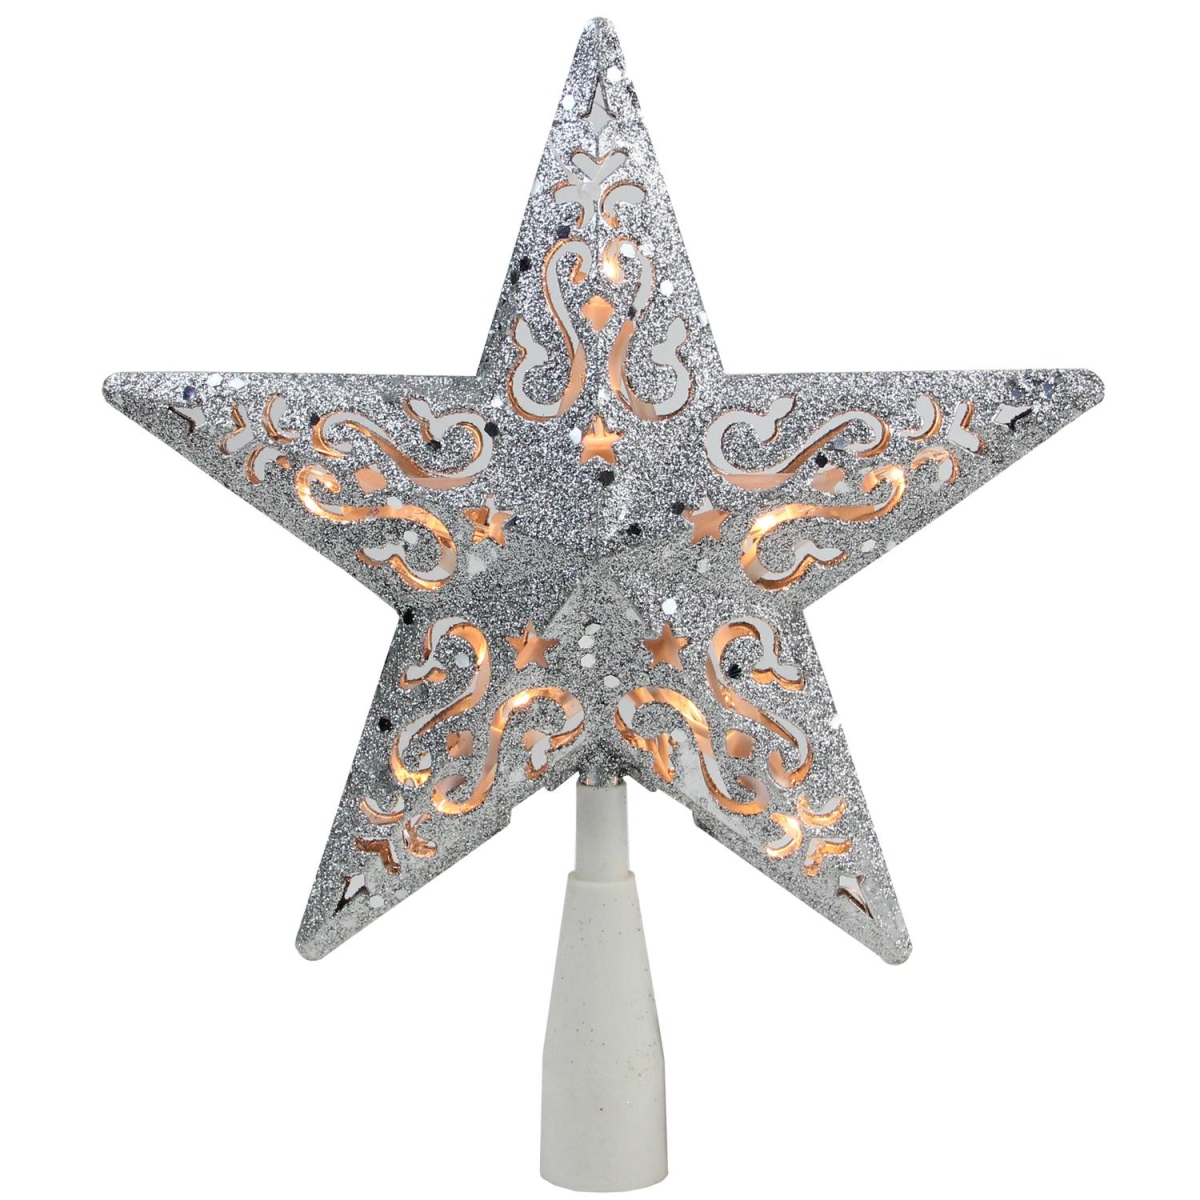 Picture of Northlight 32606355 8.5 in. Silver Glitter Star Cut-Out Design Christmas Tree Topper - Clear Lights